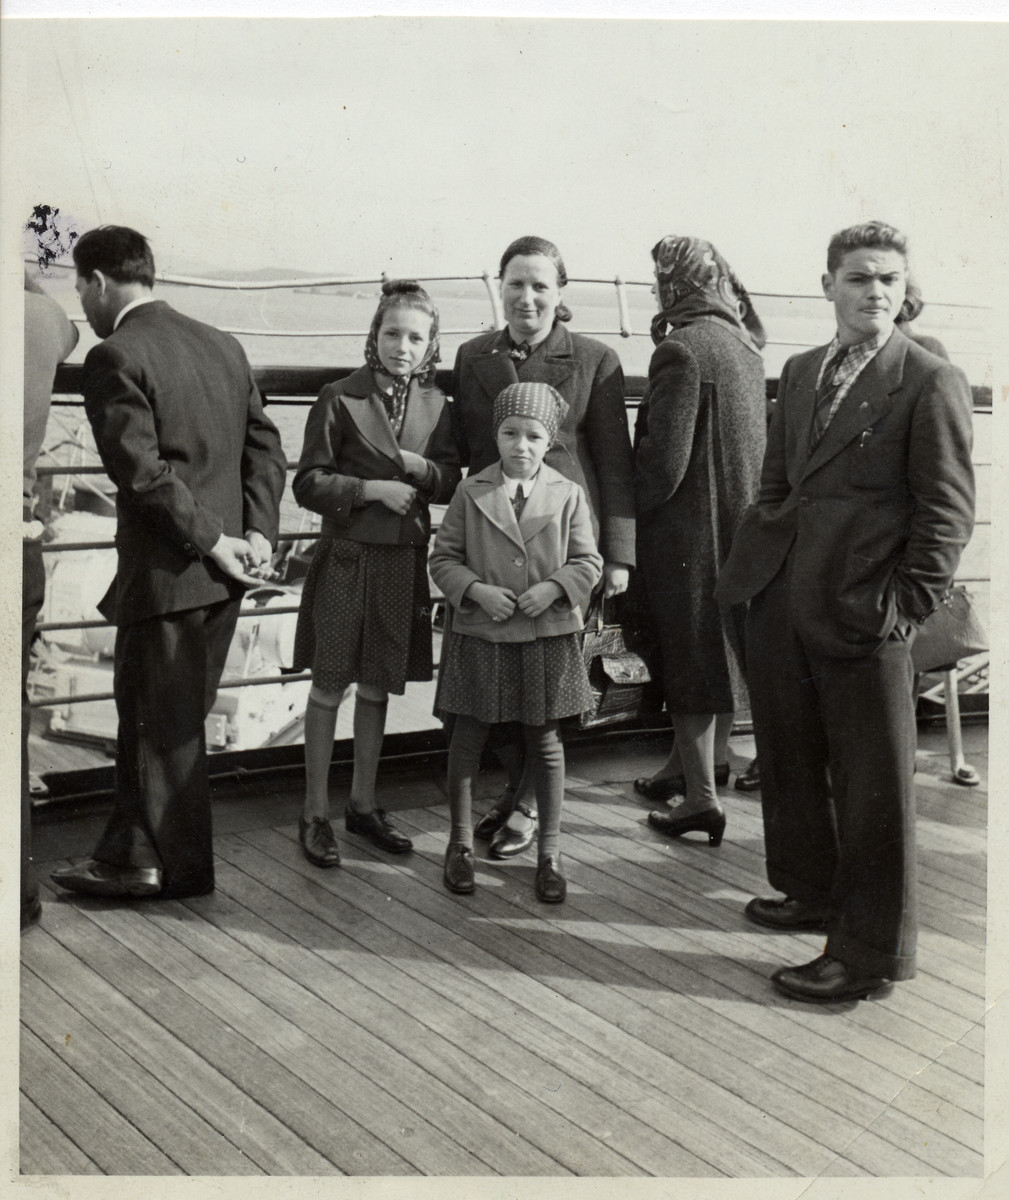 A Deaf Austrian Jewish family on board the "SS Rex," en route from Genoa to New York.

Among those pictured are Hilda Wiener Rattner (center) and her daughters Nelly (left) and Lilly (right).